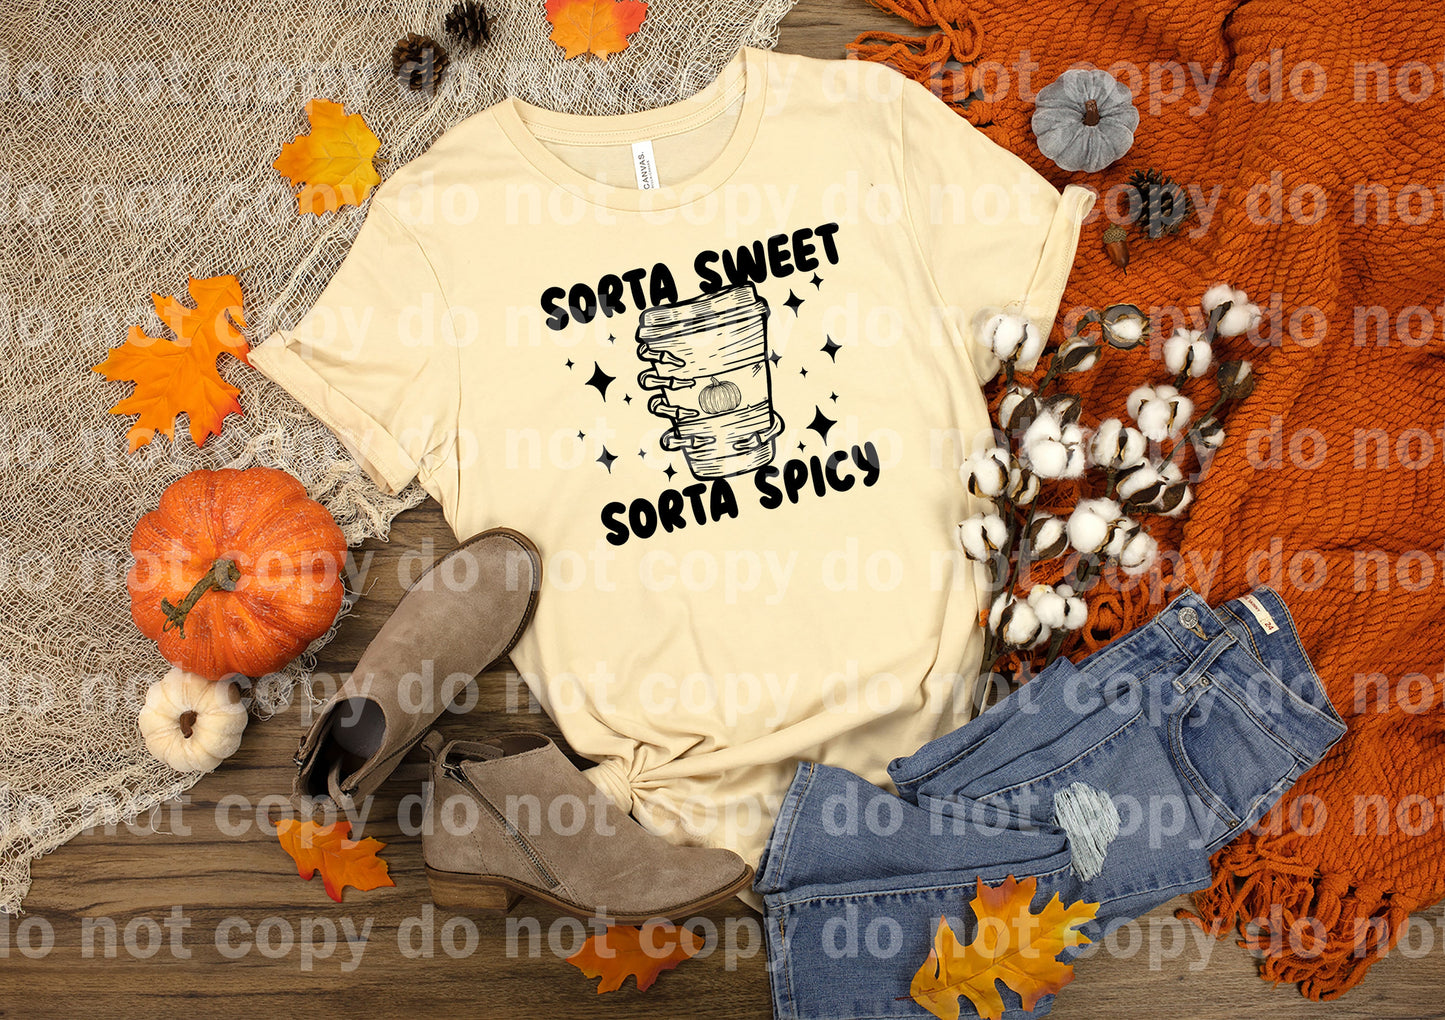 Sorta Sweet Sorta Spicy Full Color/One Color with Pocket Option Dream Print or Sublimation Print